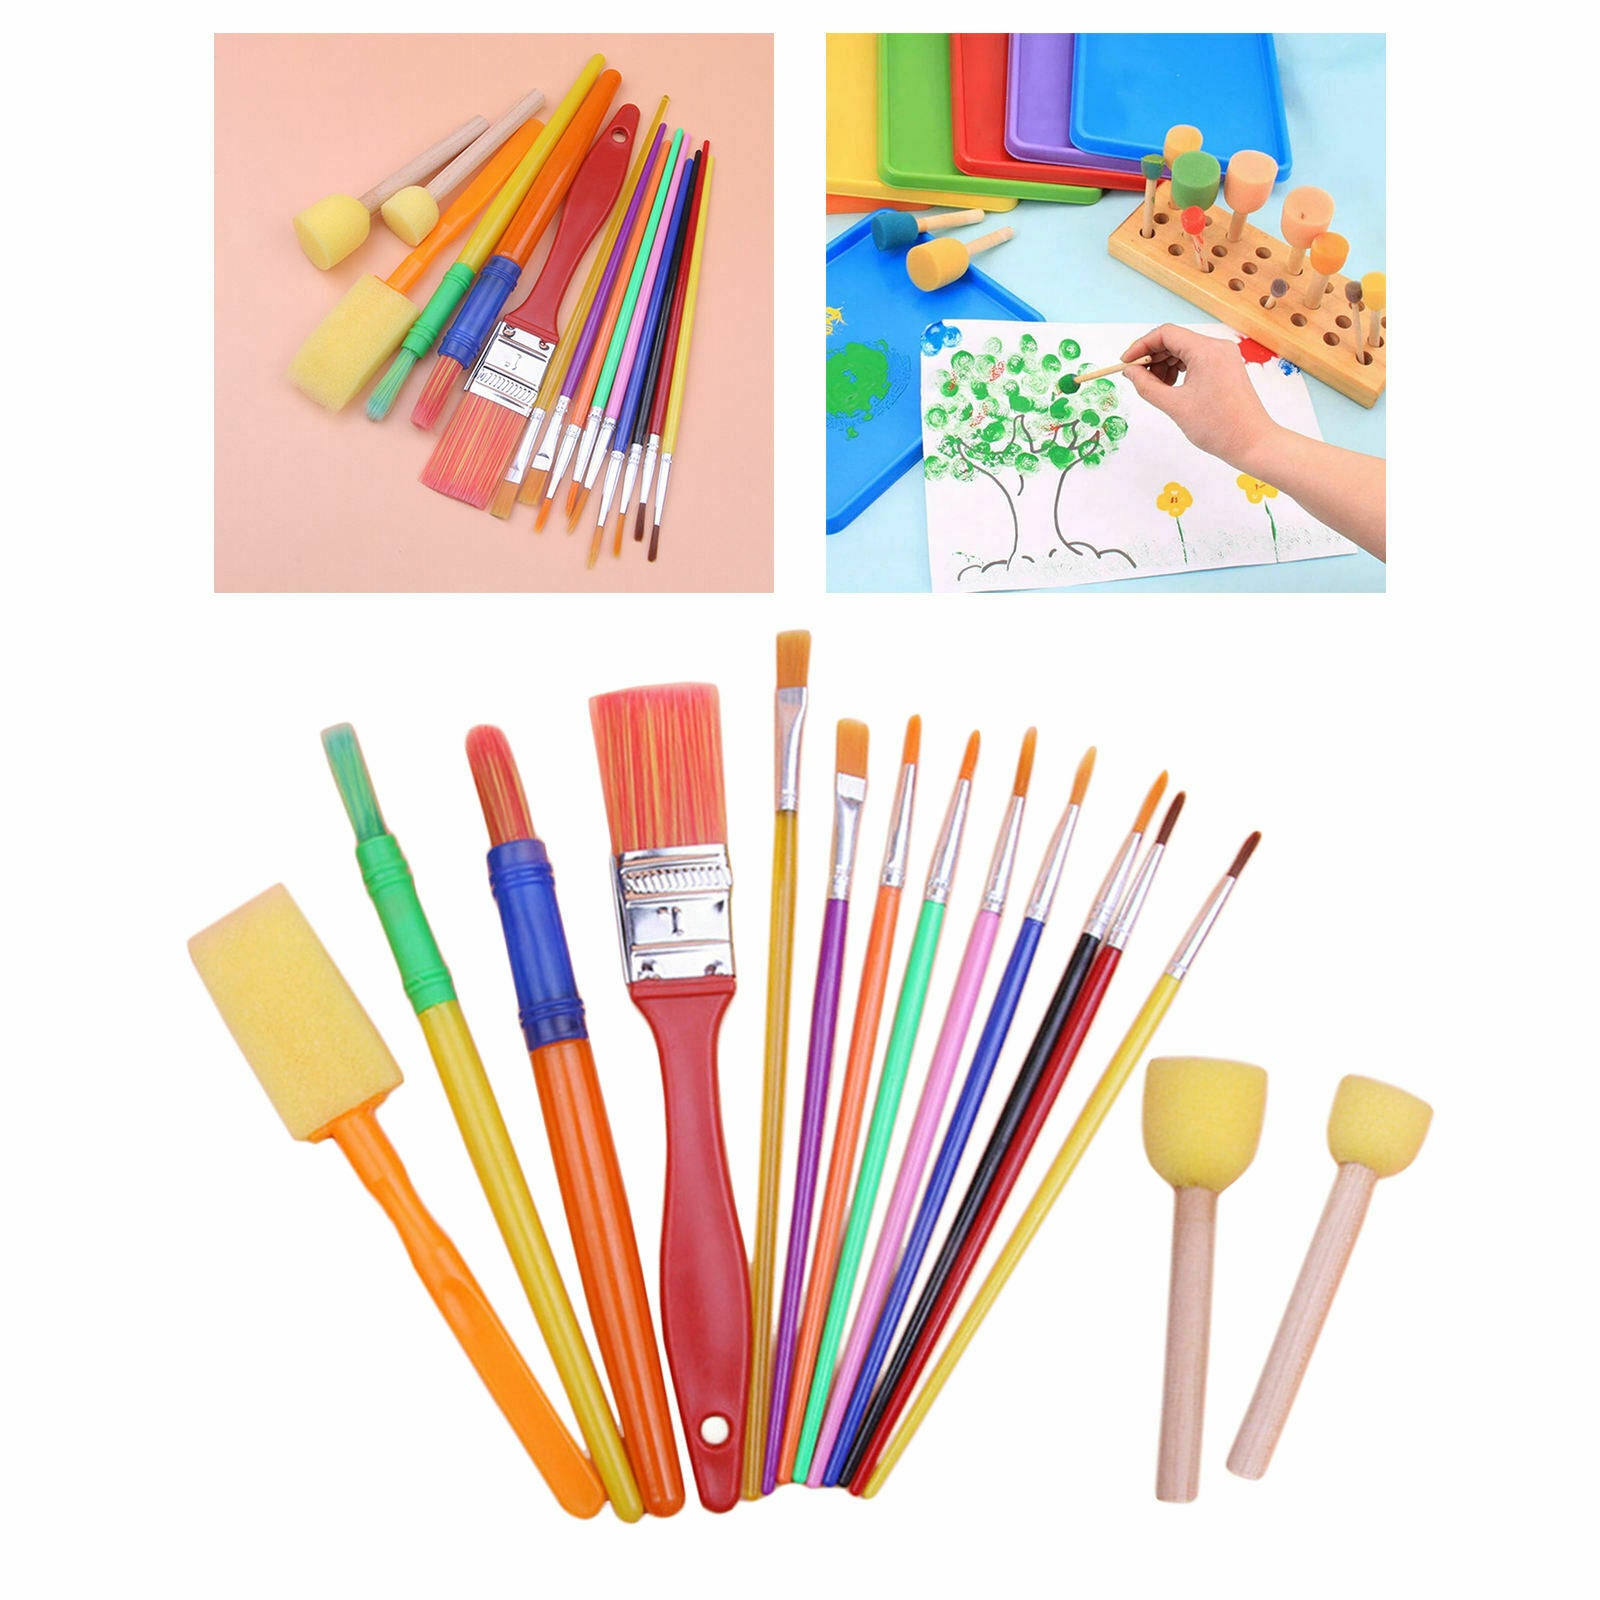 Paint Brushes Kit DIY Crafts Painting Drawing Tools Kid's Beginner Gift